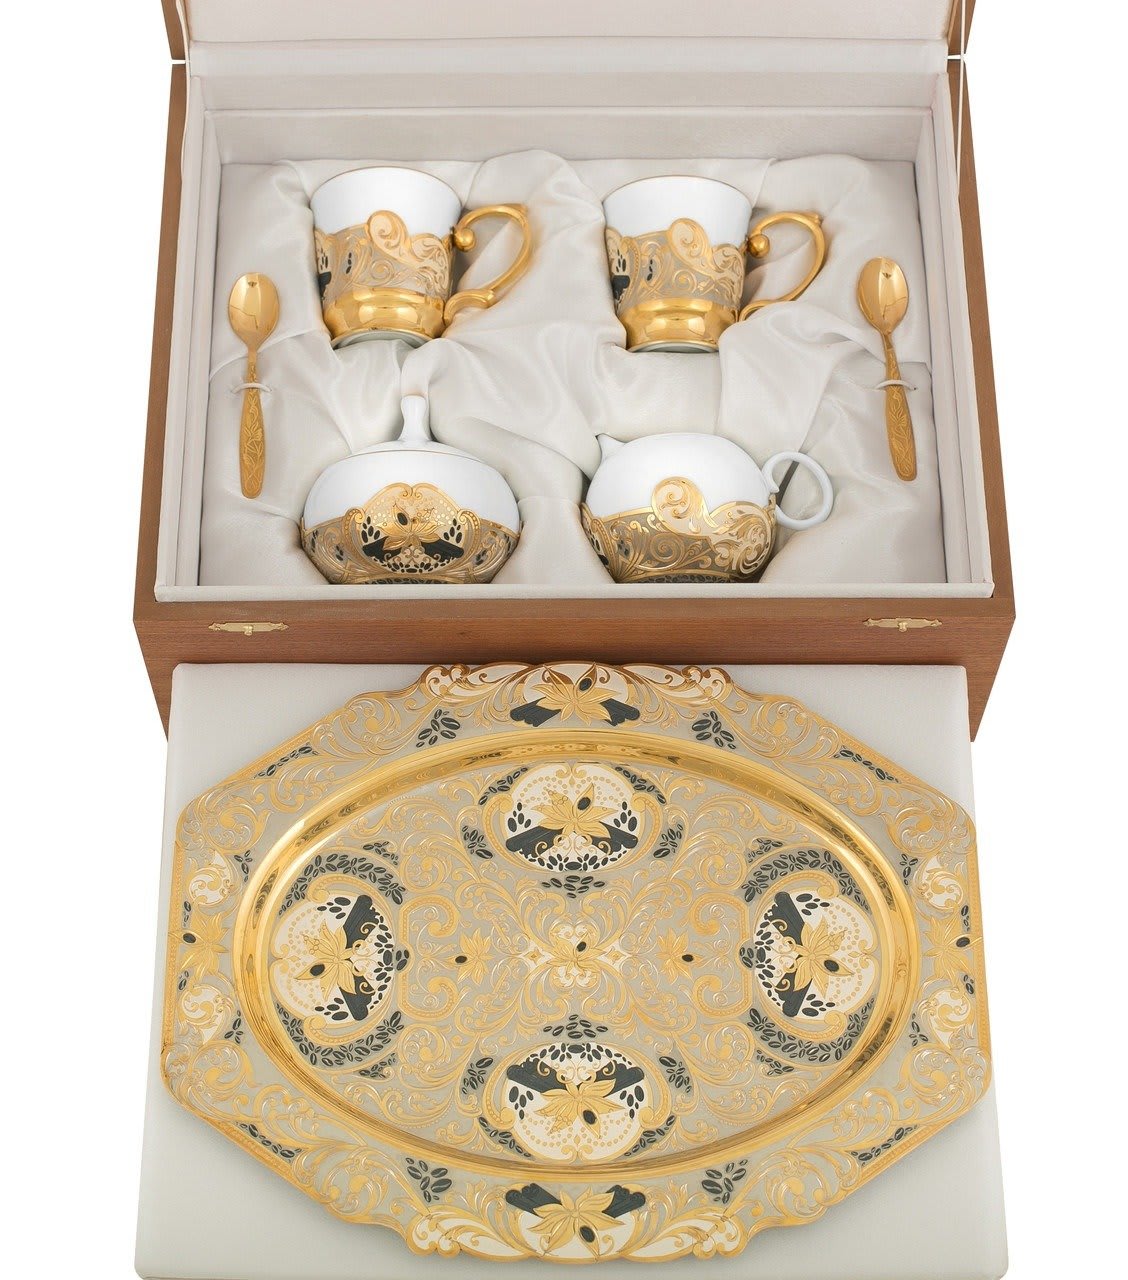 Luxury Imperial Bone Porcelain Coffee Set Stains on Sun